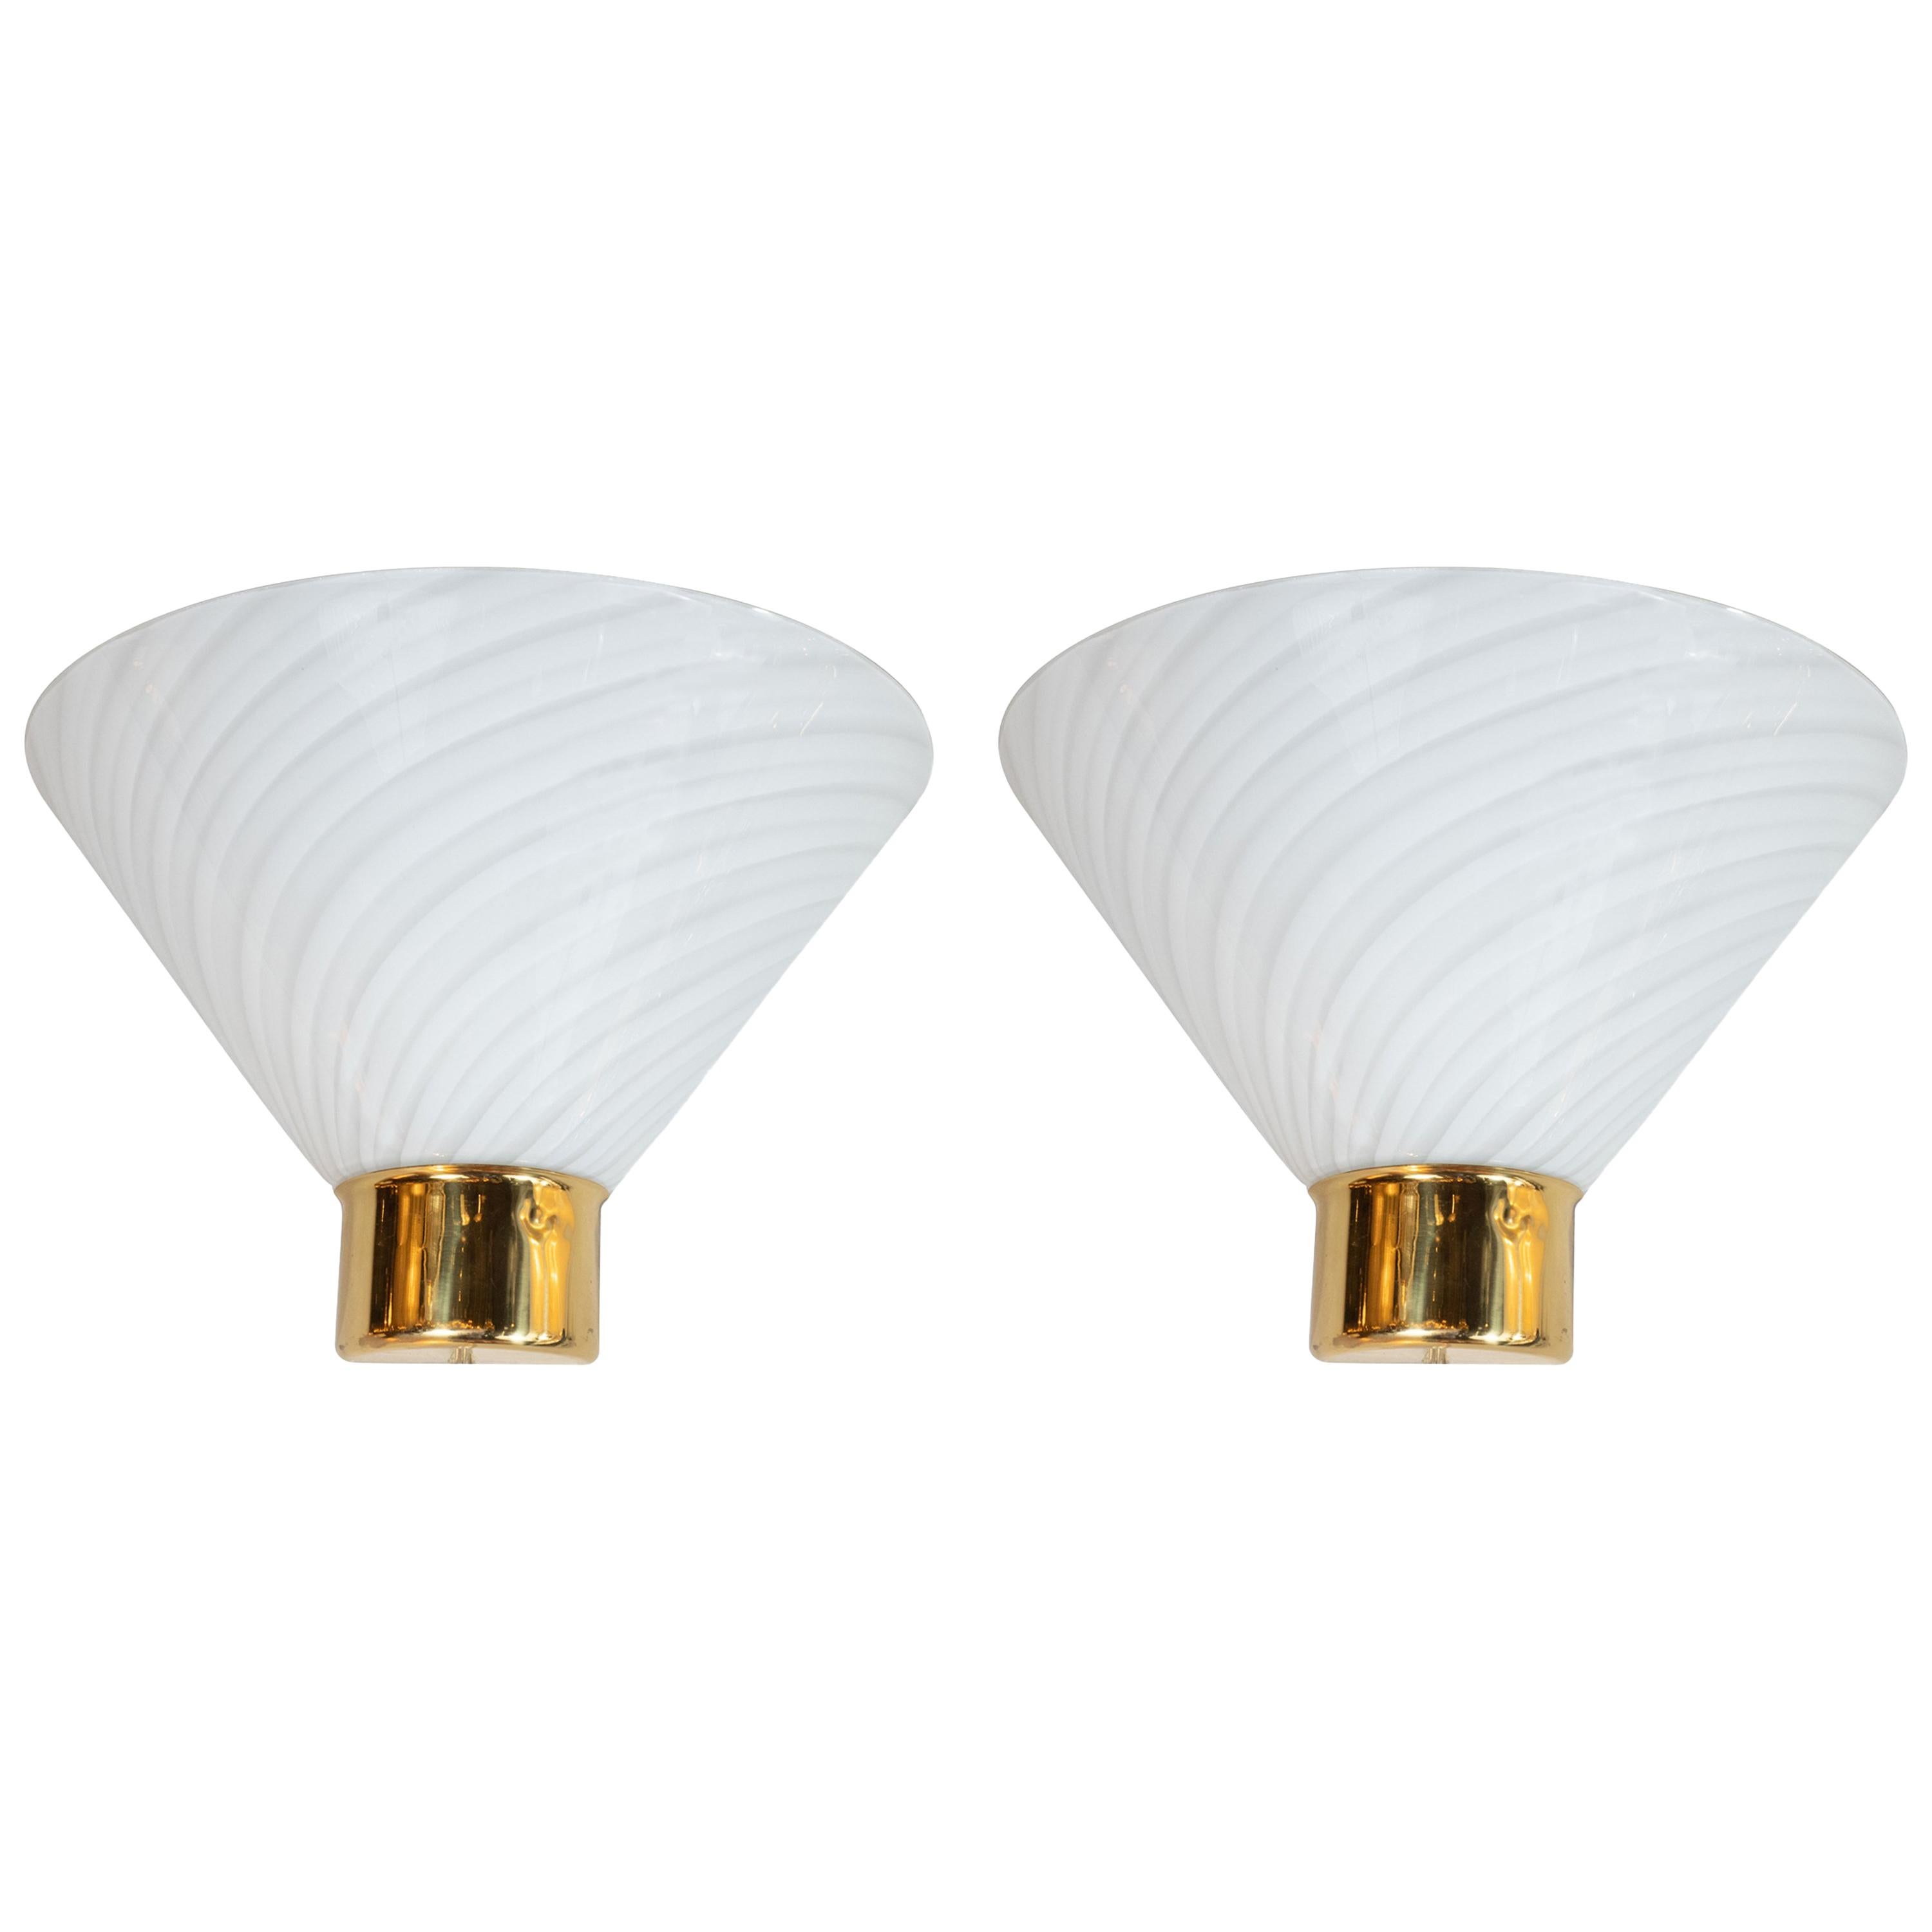 Pair of Midcentury Handblown Striated Murano Glass and Brass Sconces by Fabbian For Sale